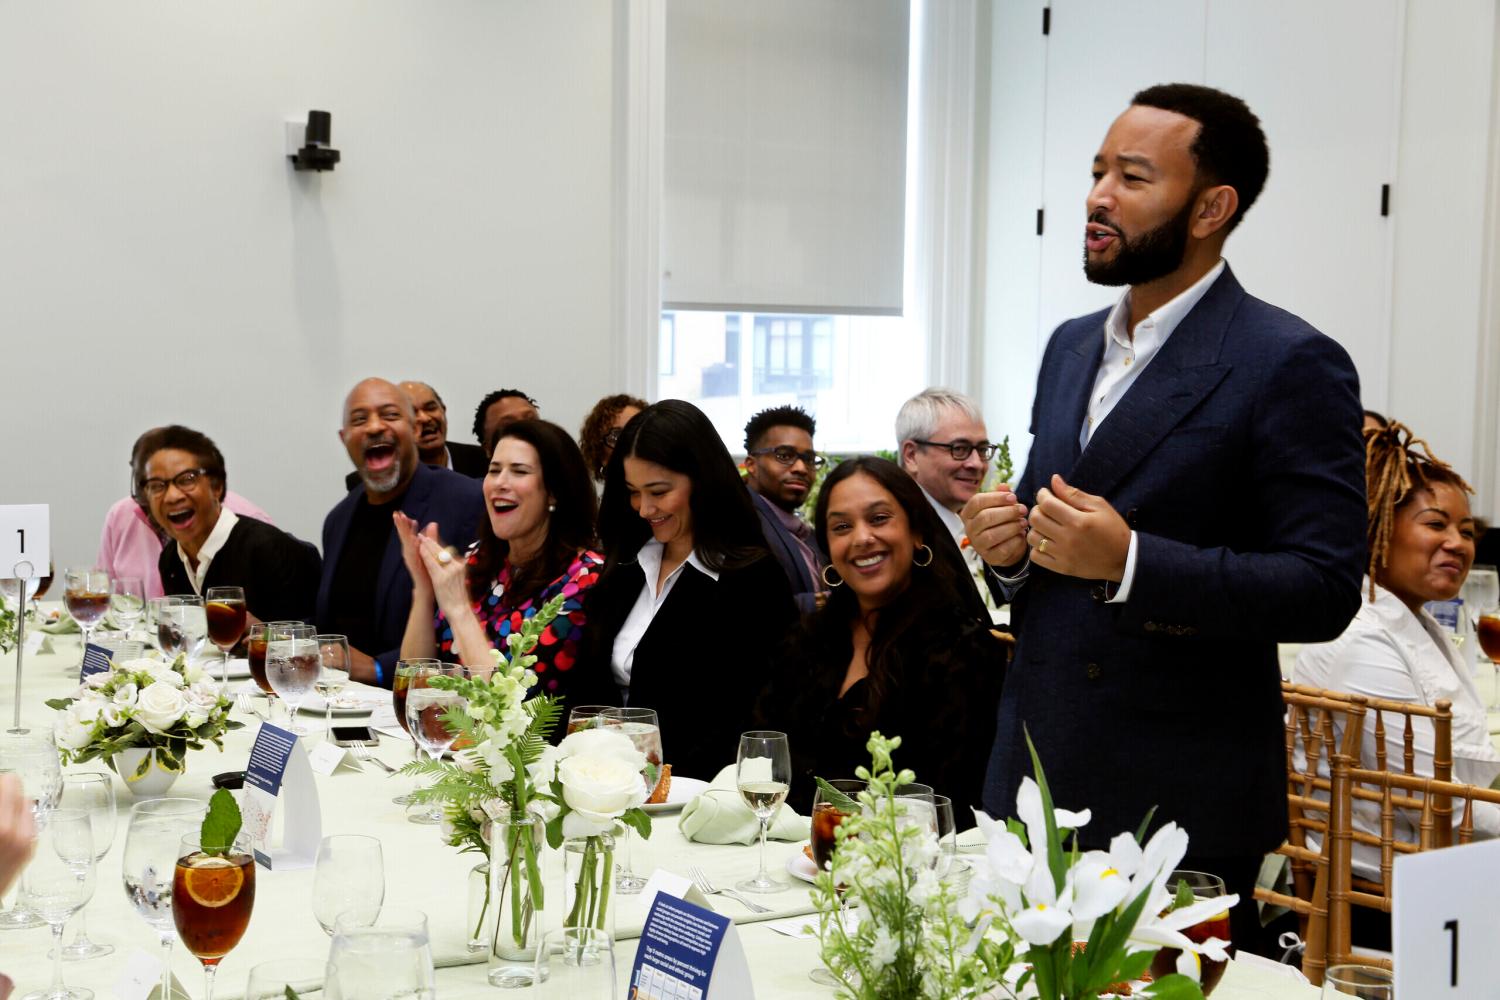 John Legend speaking at lunch table